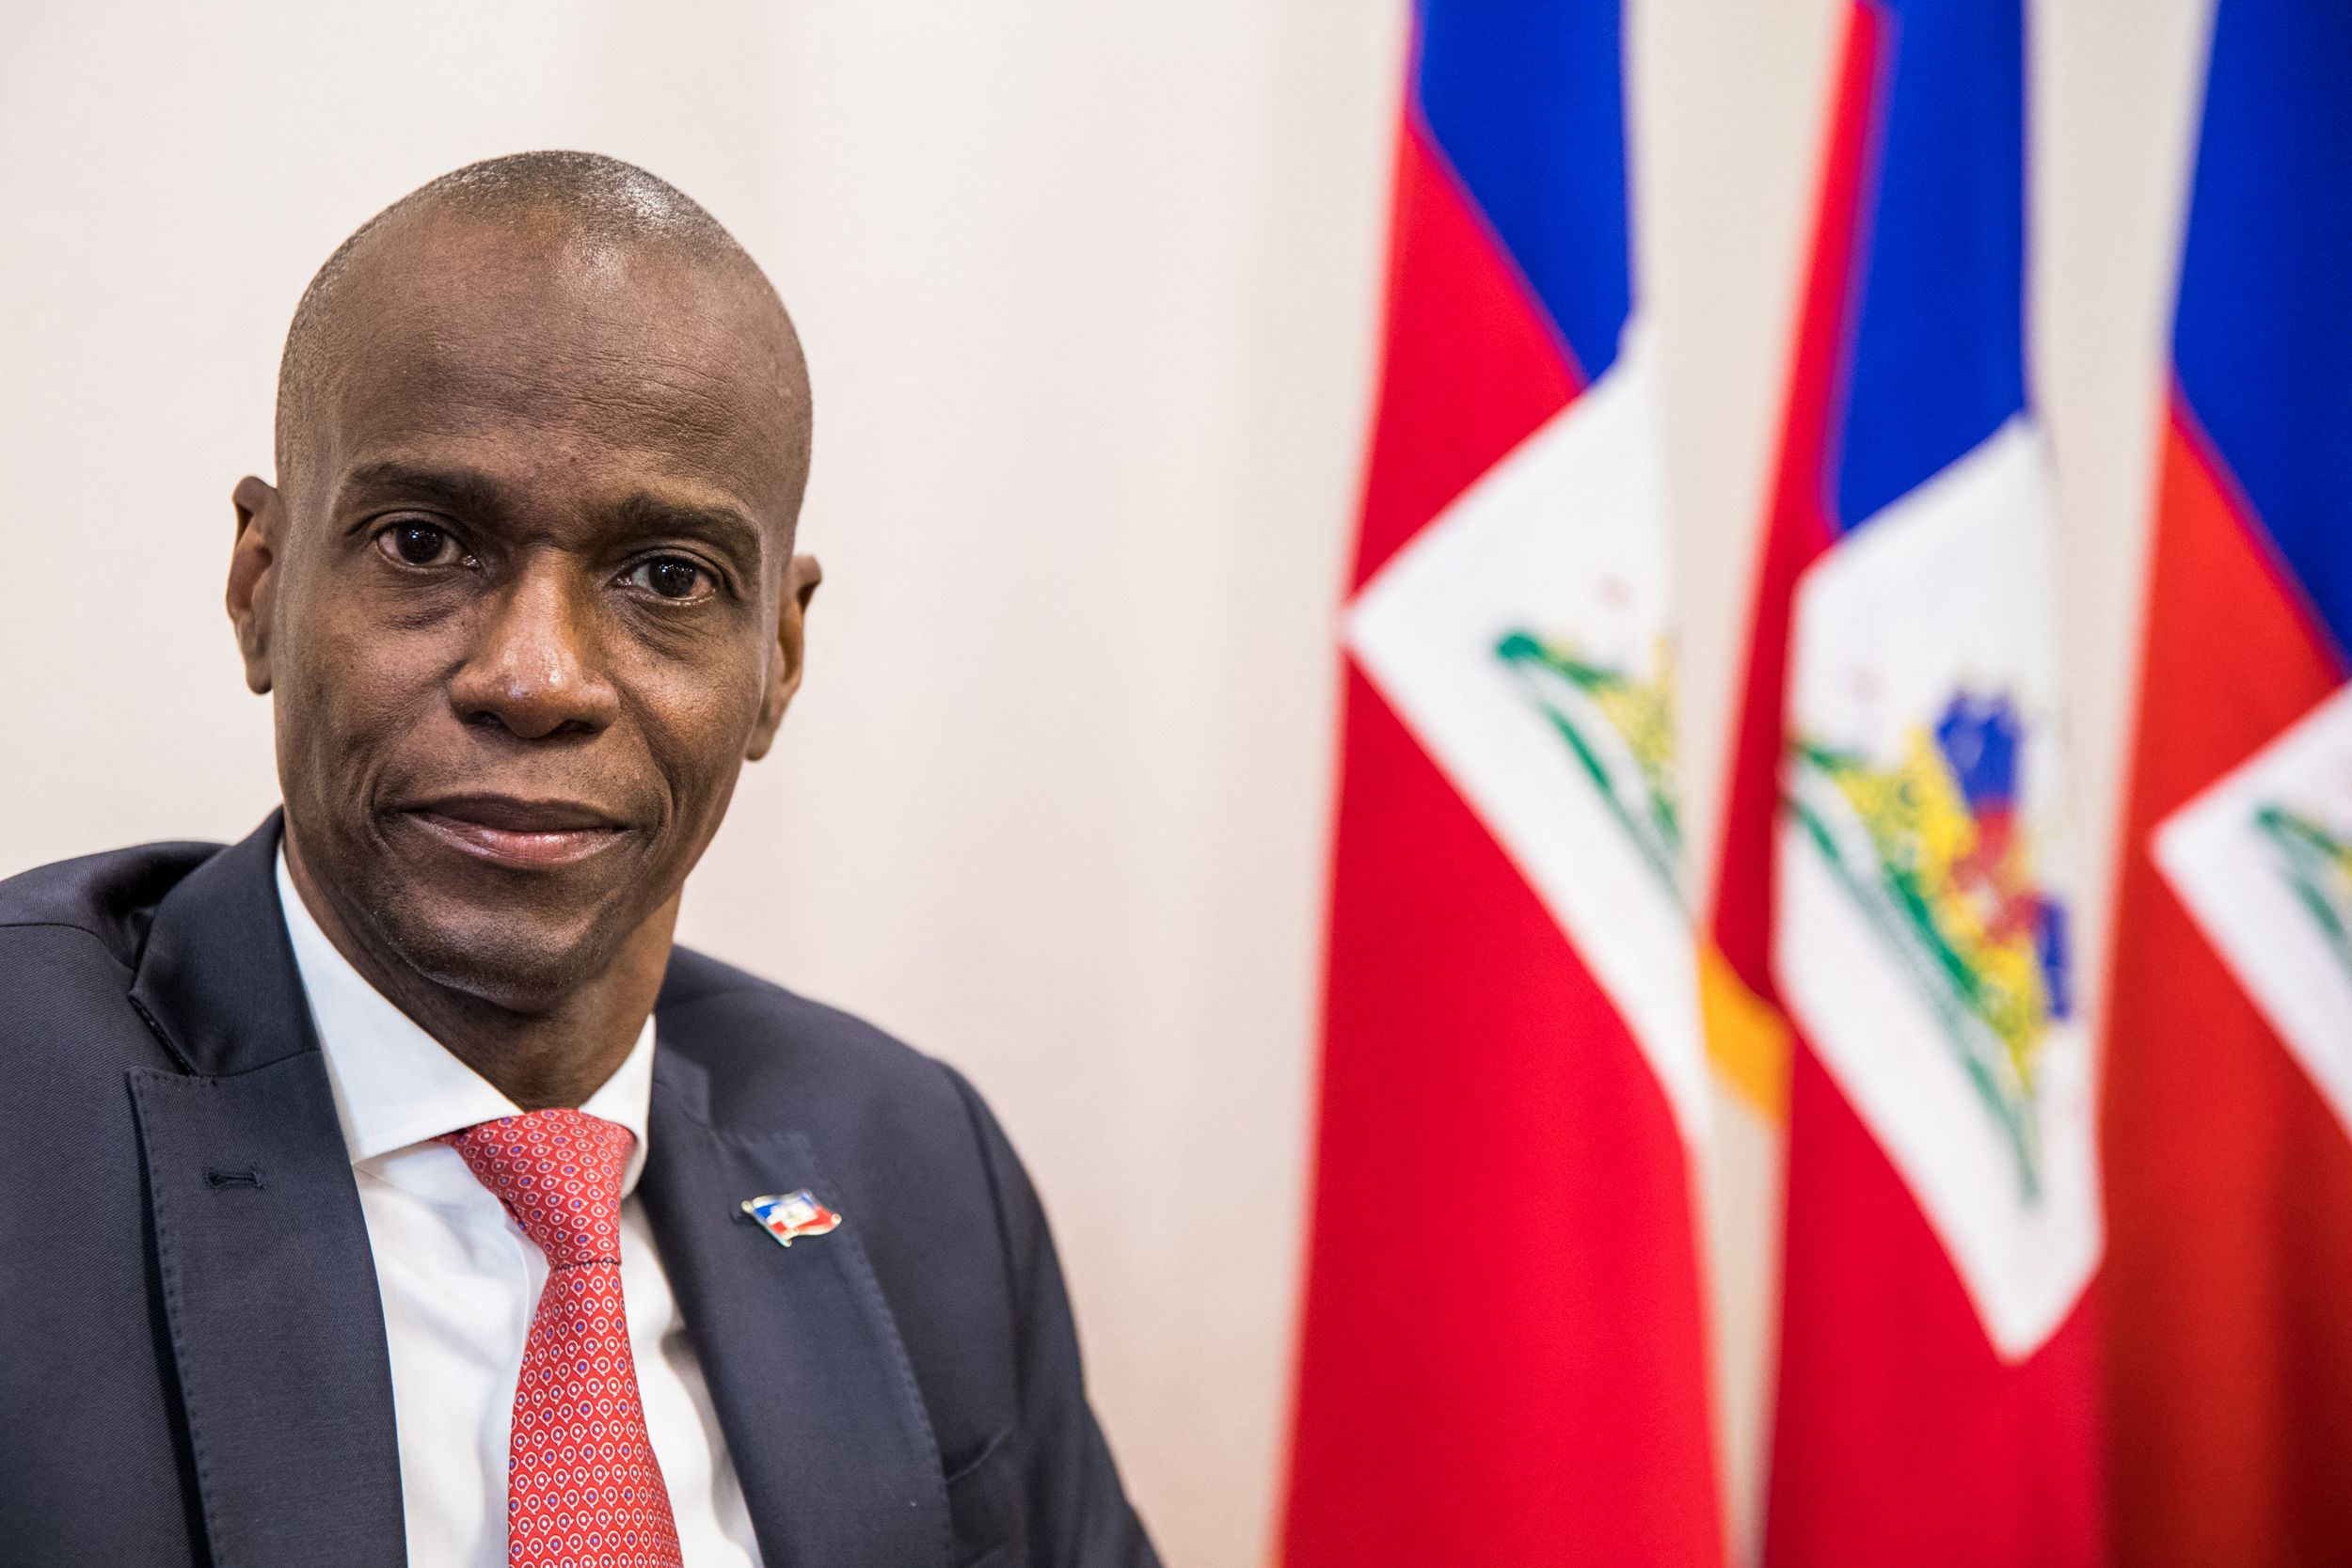 PHOTO: In this file photo taken on Oct. 22, 2019 President Jovenel Moise sits at the Presidential Palace in Port-au-Prince.